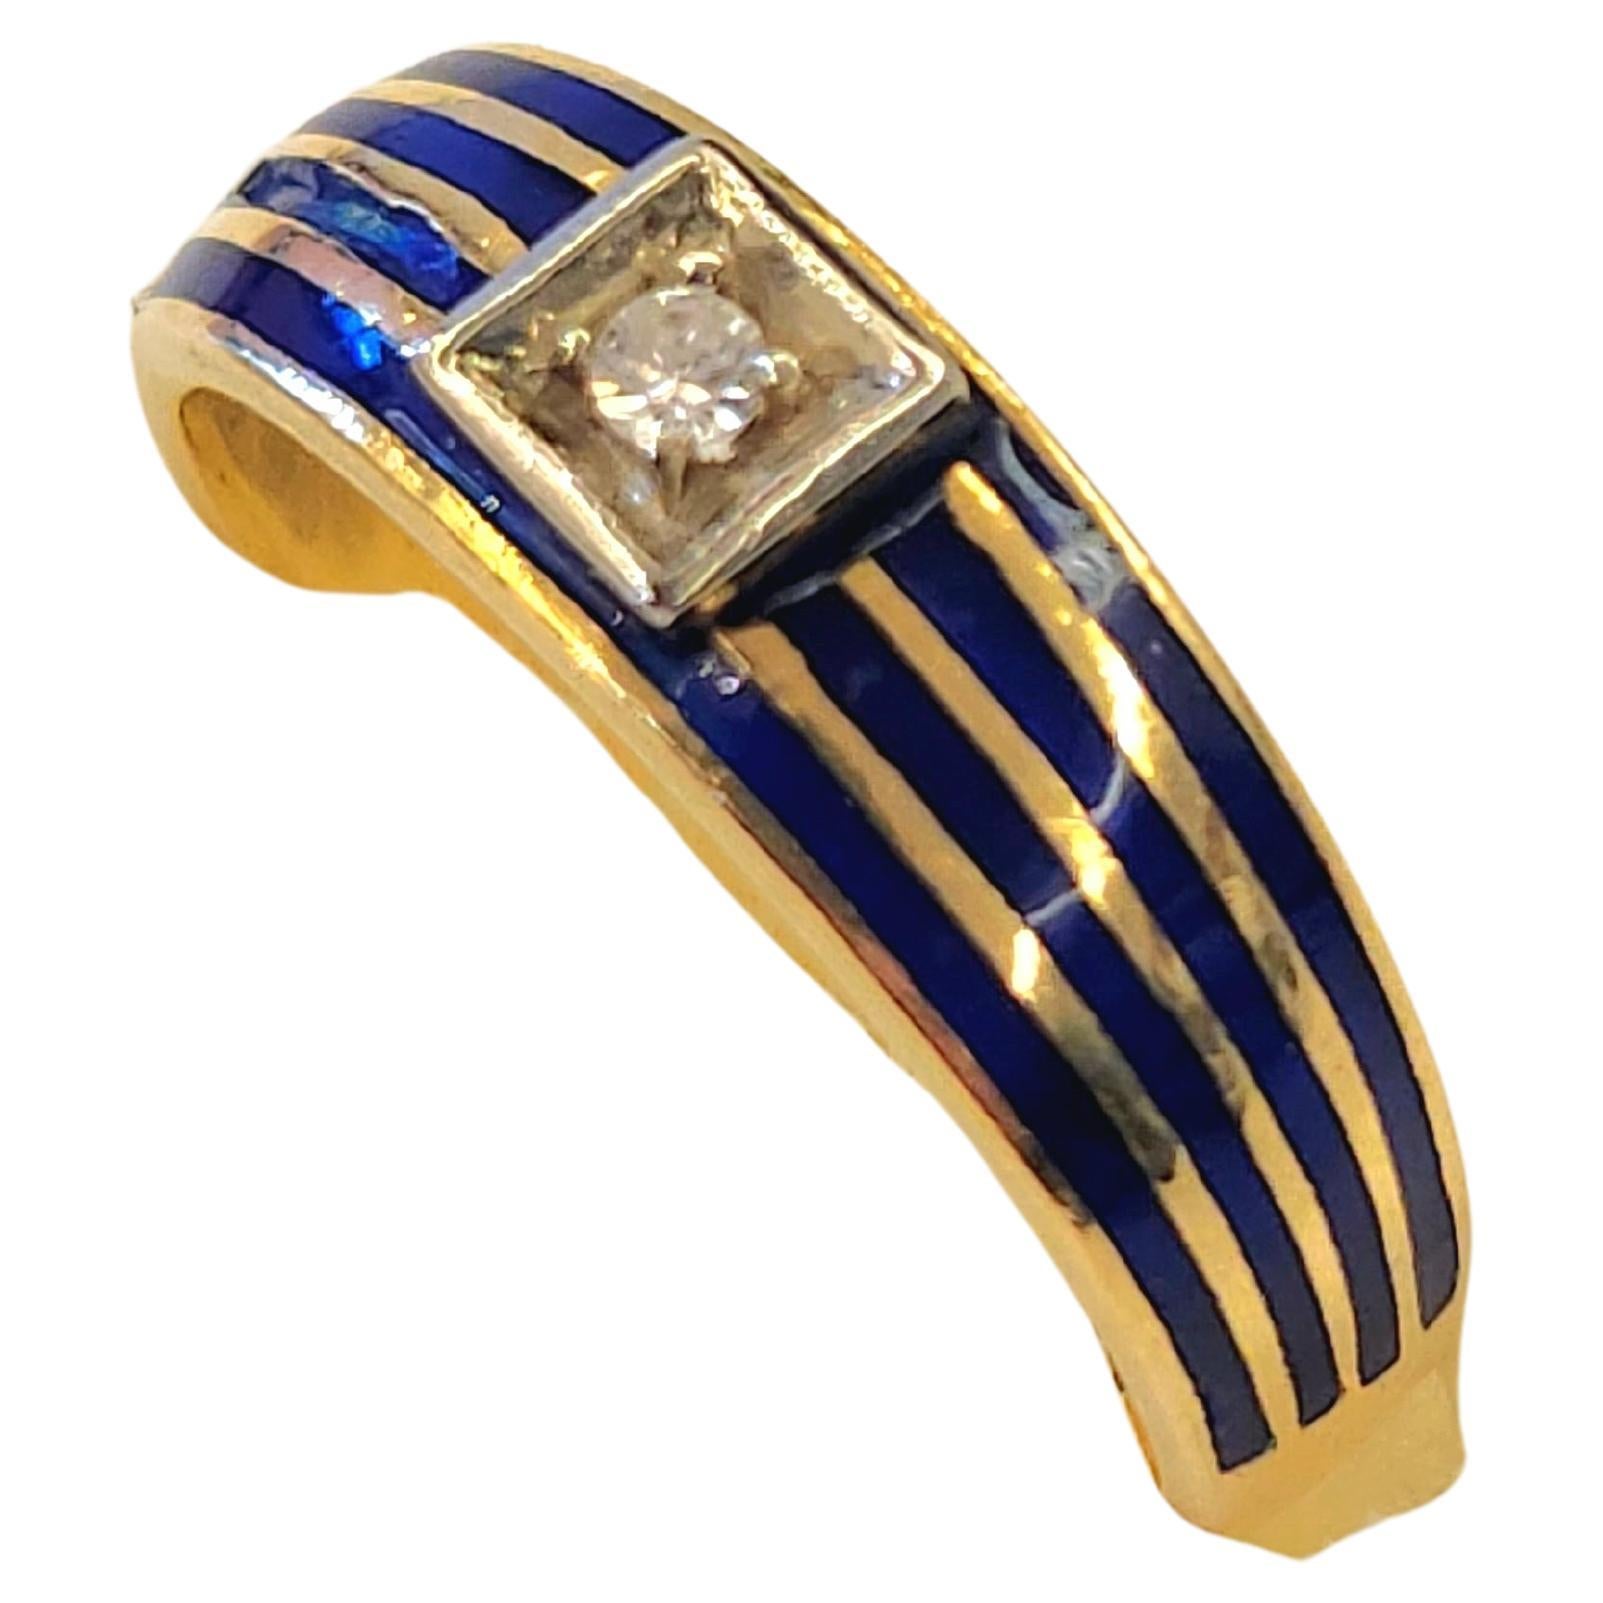 Antique 1900s Enamel and Diamond Gold Ring For Sale